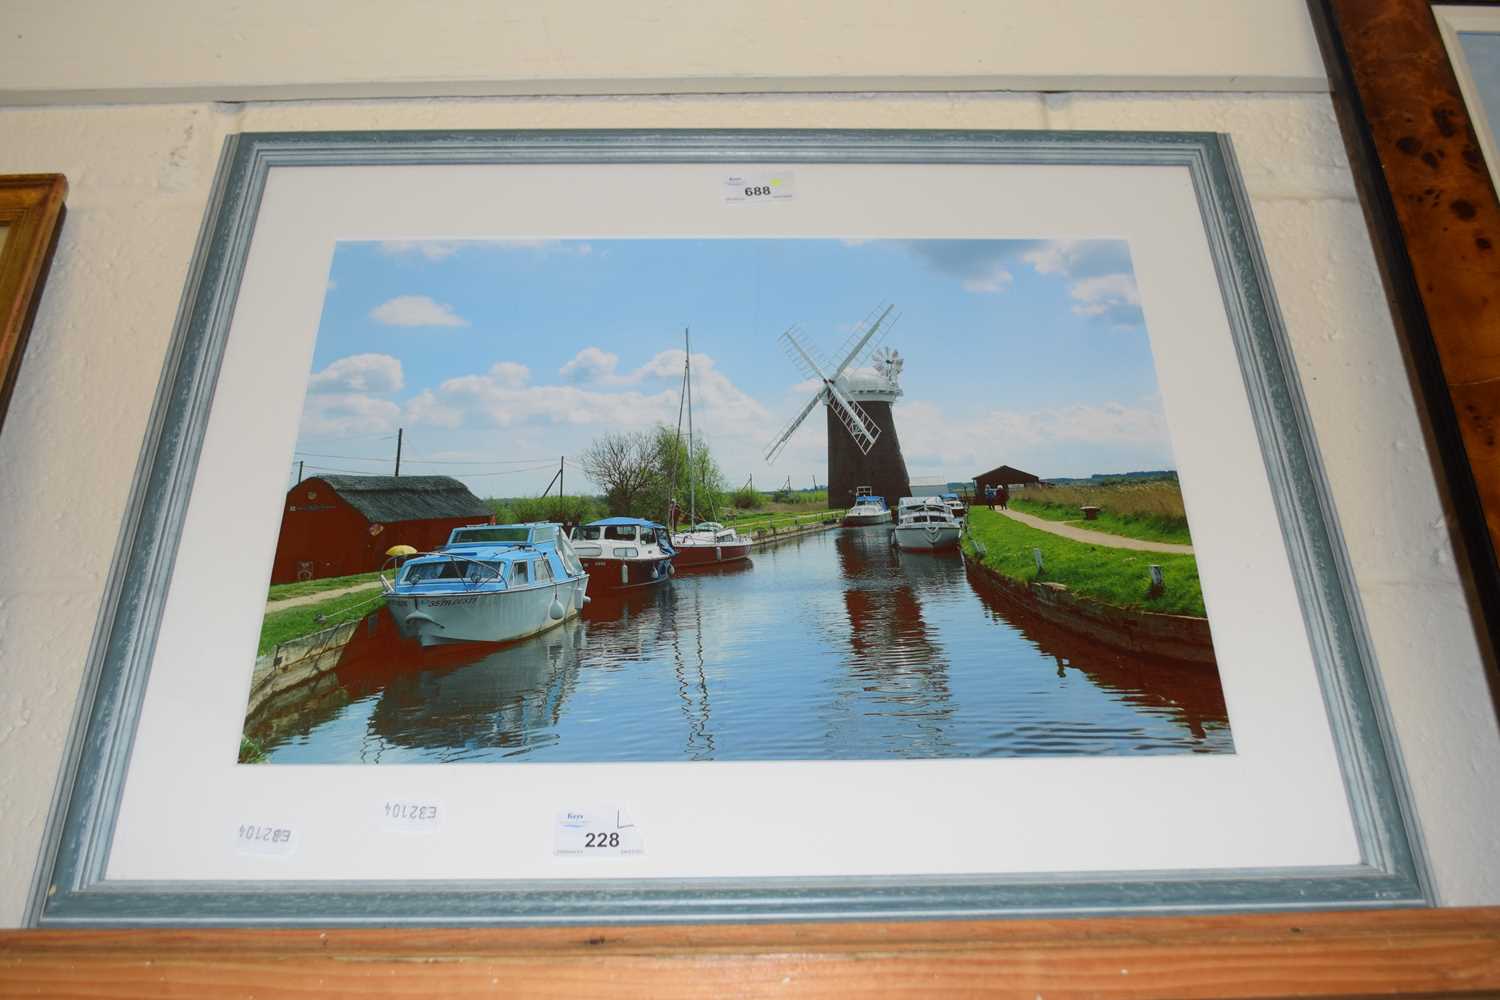 Photographic print of a Broadland scene with windmill